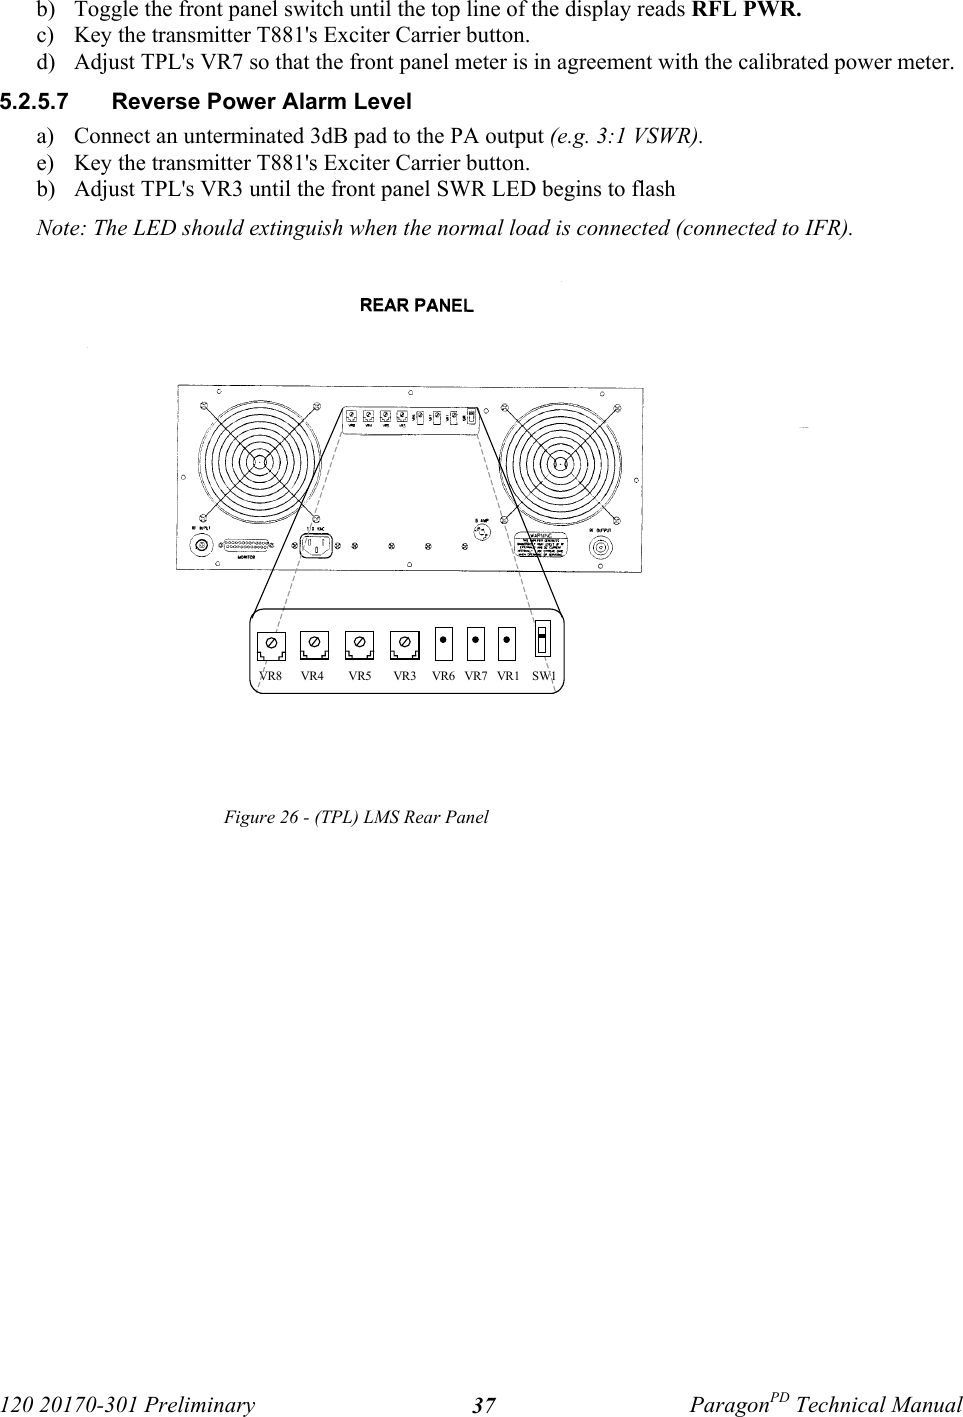 120 20170-301 Preliminary ParagonPD Technical Manual37b) Toggle the front panel switch until the top line of the display reads RFL PWR.c) Key the transmitter T881&apos;s Exciter Carrier button.d) Adjust TPL&apos;s VR7 so that the front panel meter is in agreement with the calibrated power meter. 5.2.5.7  Reverse Power Alarm Levela) Connect an unterminated 3dB pad to the PA output (e.g. 3:1 VSWR).e) Key the transmitter T881&apos;s Exciter Carrier button.b) Adjust TPL&apos;s VR3 until the front panel SWR LED begins to flashNote: The LED should extinguish when the normal load is connected (connected to IFR).Figure 26 - (TPL) LMS Rear Panel VR8      VR4        VR5       VR3     VR6   VR7   VR1    SW1